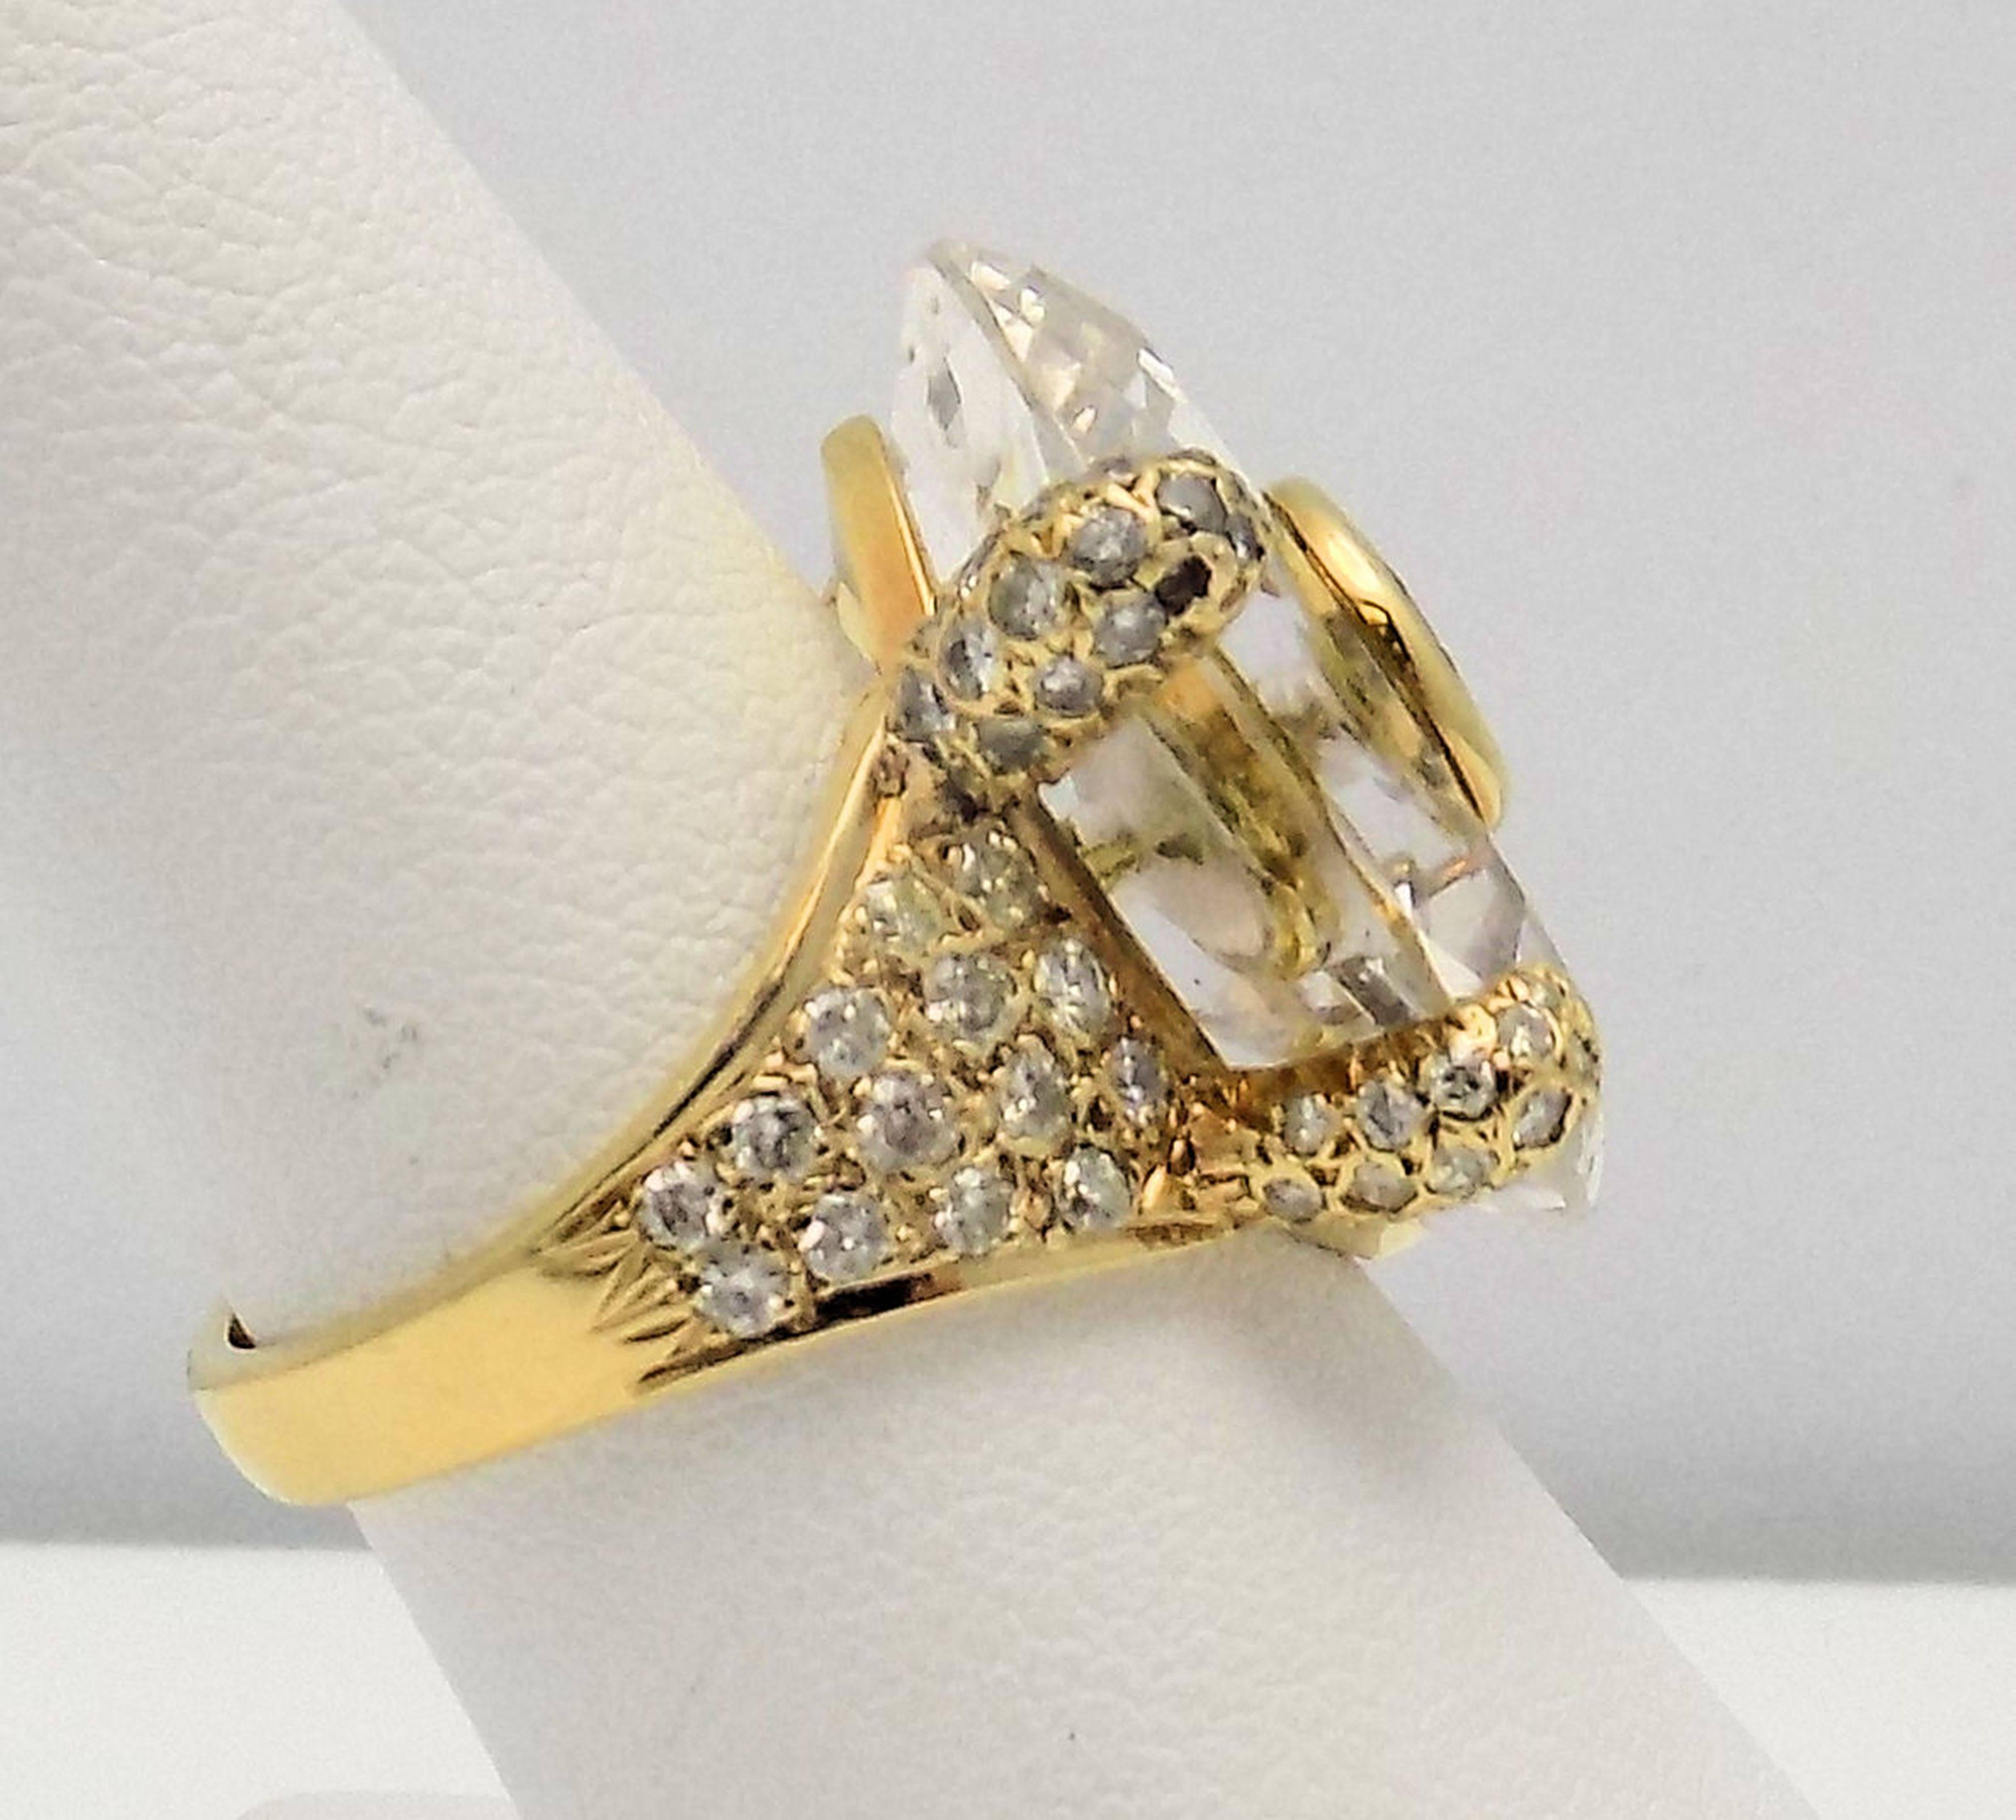 Very Stylish 18 Karat Yellow Gold Ring with 1 Round Brilliant Fancy Yellowish Brown Diamond, 0.70 Carat SI, 92 Round Brilliant Diamonds, 1.04 Carat Total Weight SI-1, H, and Hexagonal Faceted Quartz. Size: 6.5. 6.3 DWT or 12.90 Grams.